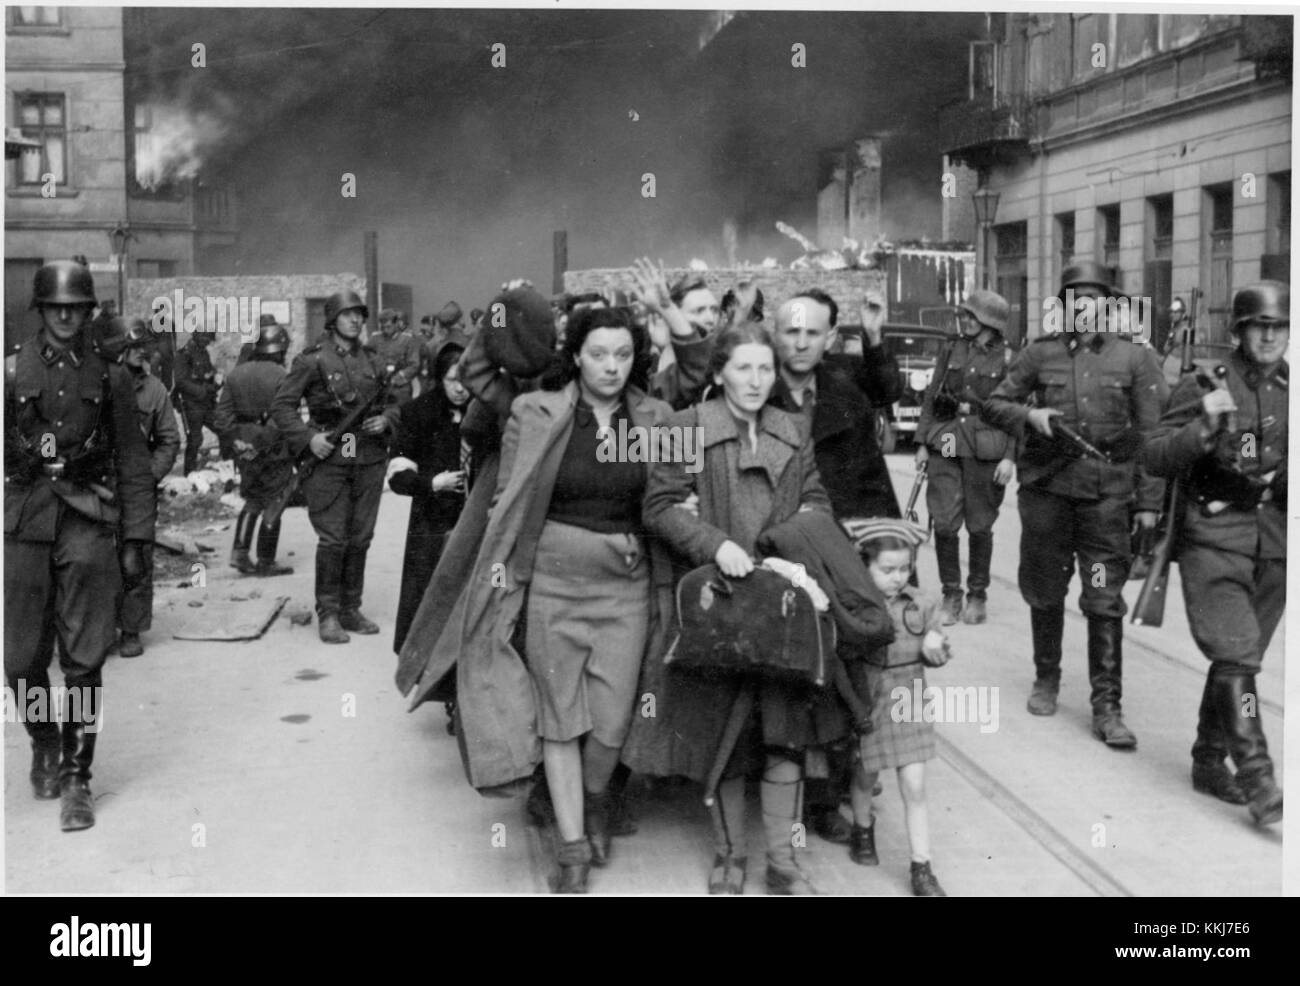 Stroop Report 2/4 Record Group 038 United States Counsel for the Prosecution of Axis Criminality; United States Exhibits, 1933-46 HMS Asset ID: HF1-88454435 Rediscovery Number: 06315 Stroop Report - Warsaw Ghetto Uprising 10 Stockfoto